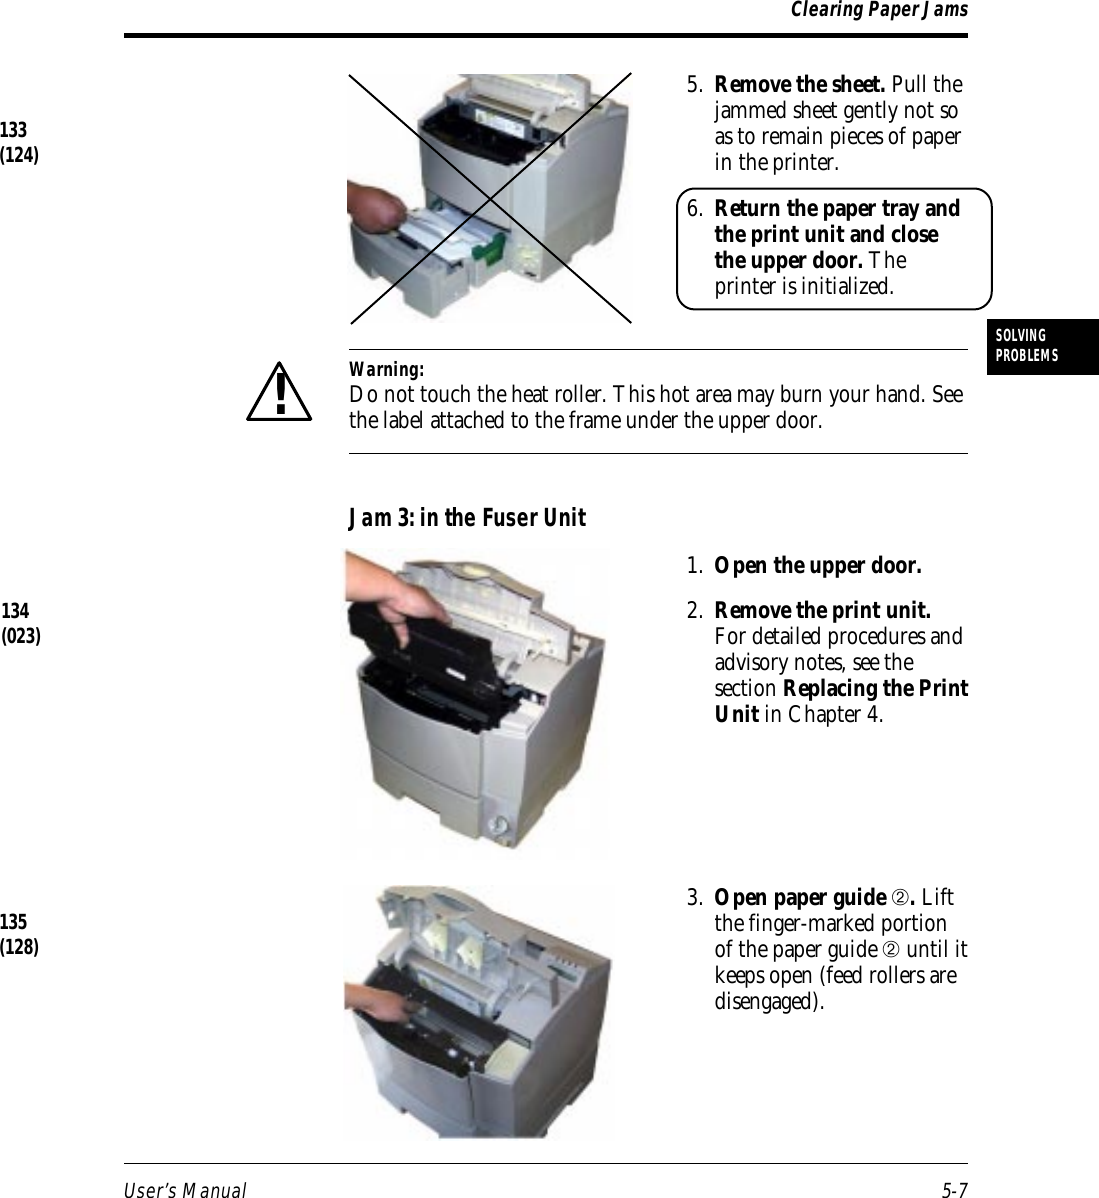 User’s Manual 5-7SOLVINGPROBLEMSClearing Paper Jams5. Remove the sheet. Pull thejammed sheet gently not soas to remain pieces of paperin the printer.6. Return the paper tray andthe print unit and closethe upper door. Theprinter is initialized.Warning:Do not touch the heat roller. This hot area may burn your hand. Seethe label attached to the frame under the upper door.Jam 3: in the Fuser Unit1. Open the upper door.2. Remove the print unit.For detailed procedures andadvisory notes, see thesection Replacing the PrintUnit in Chapter 4.3. Open paper guide ➁. Liftthe finger-marked portionof the paper guide ➁ until itkeeps open (feed rollers aredisengaged).134(023)133(124)!135(128)